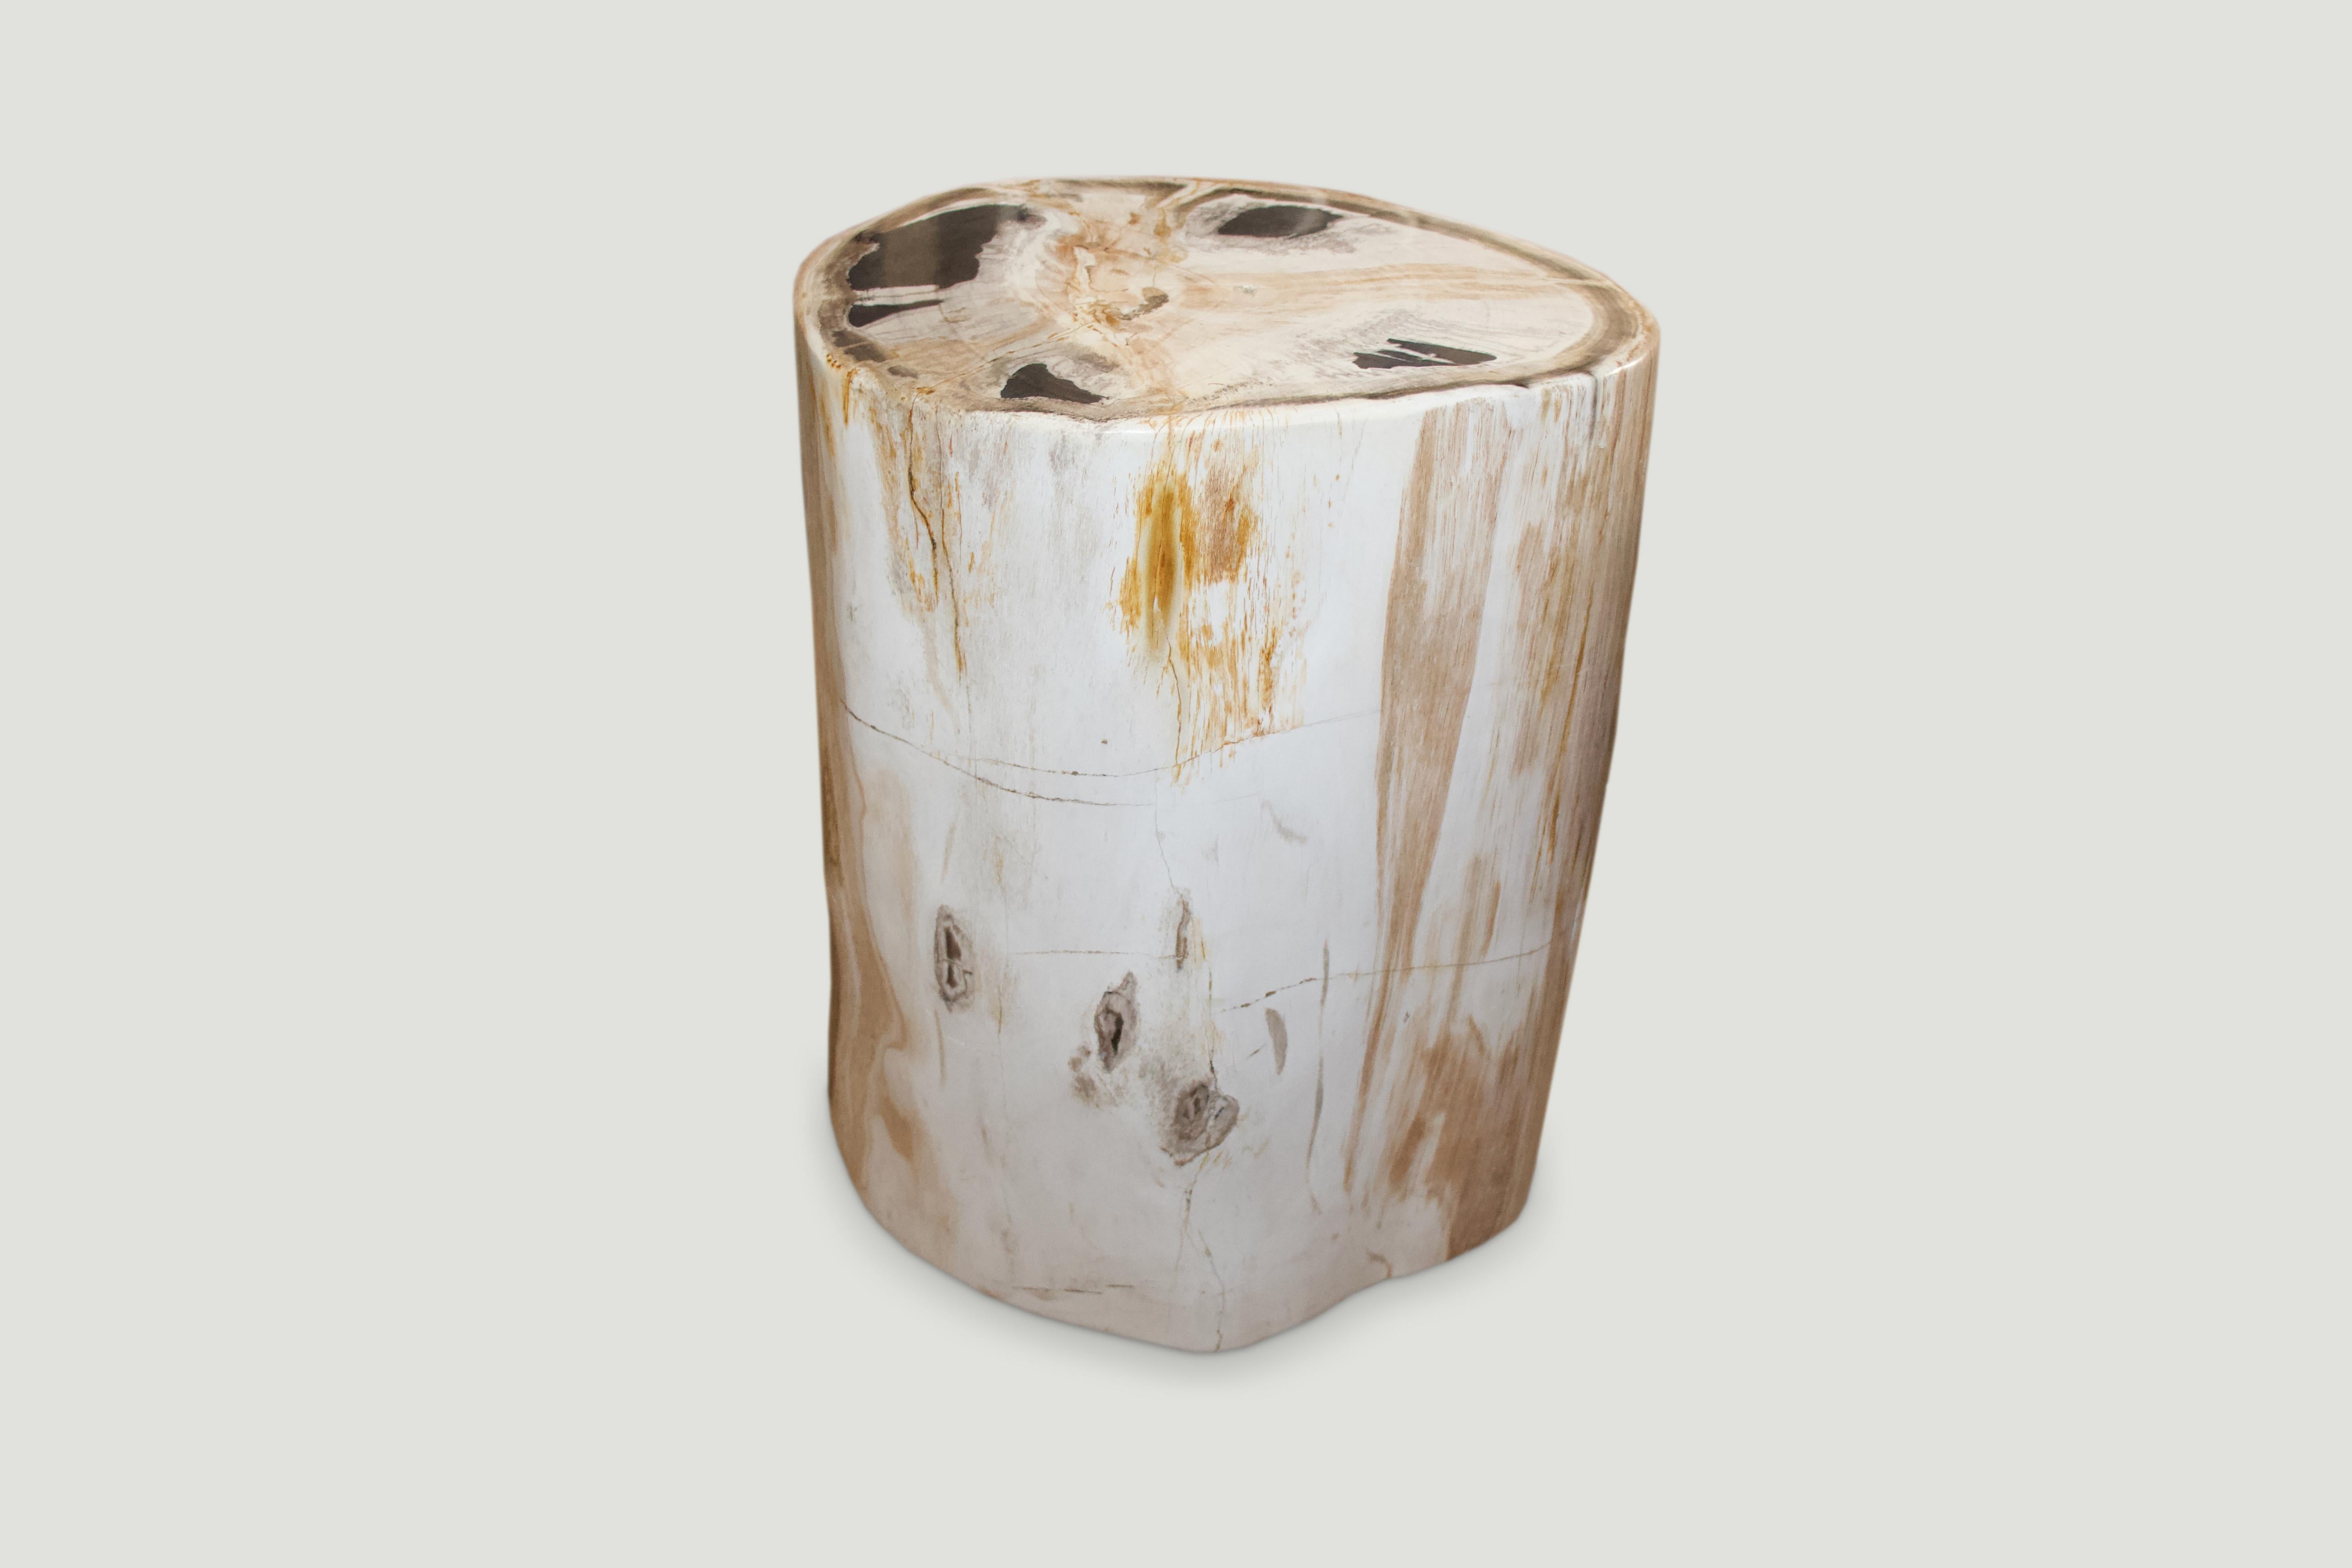 Soft pale natural markings on this super smooth, high quality petrified wood side table.

As with a diamond, we polish the highest quality fossilized petrified wood, using our latest ground breaking technology, to reveal its natural beauty and